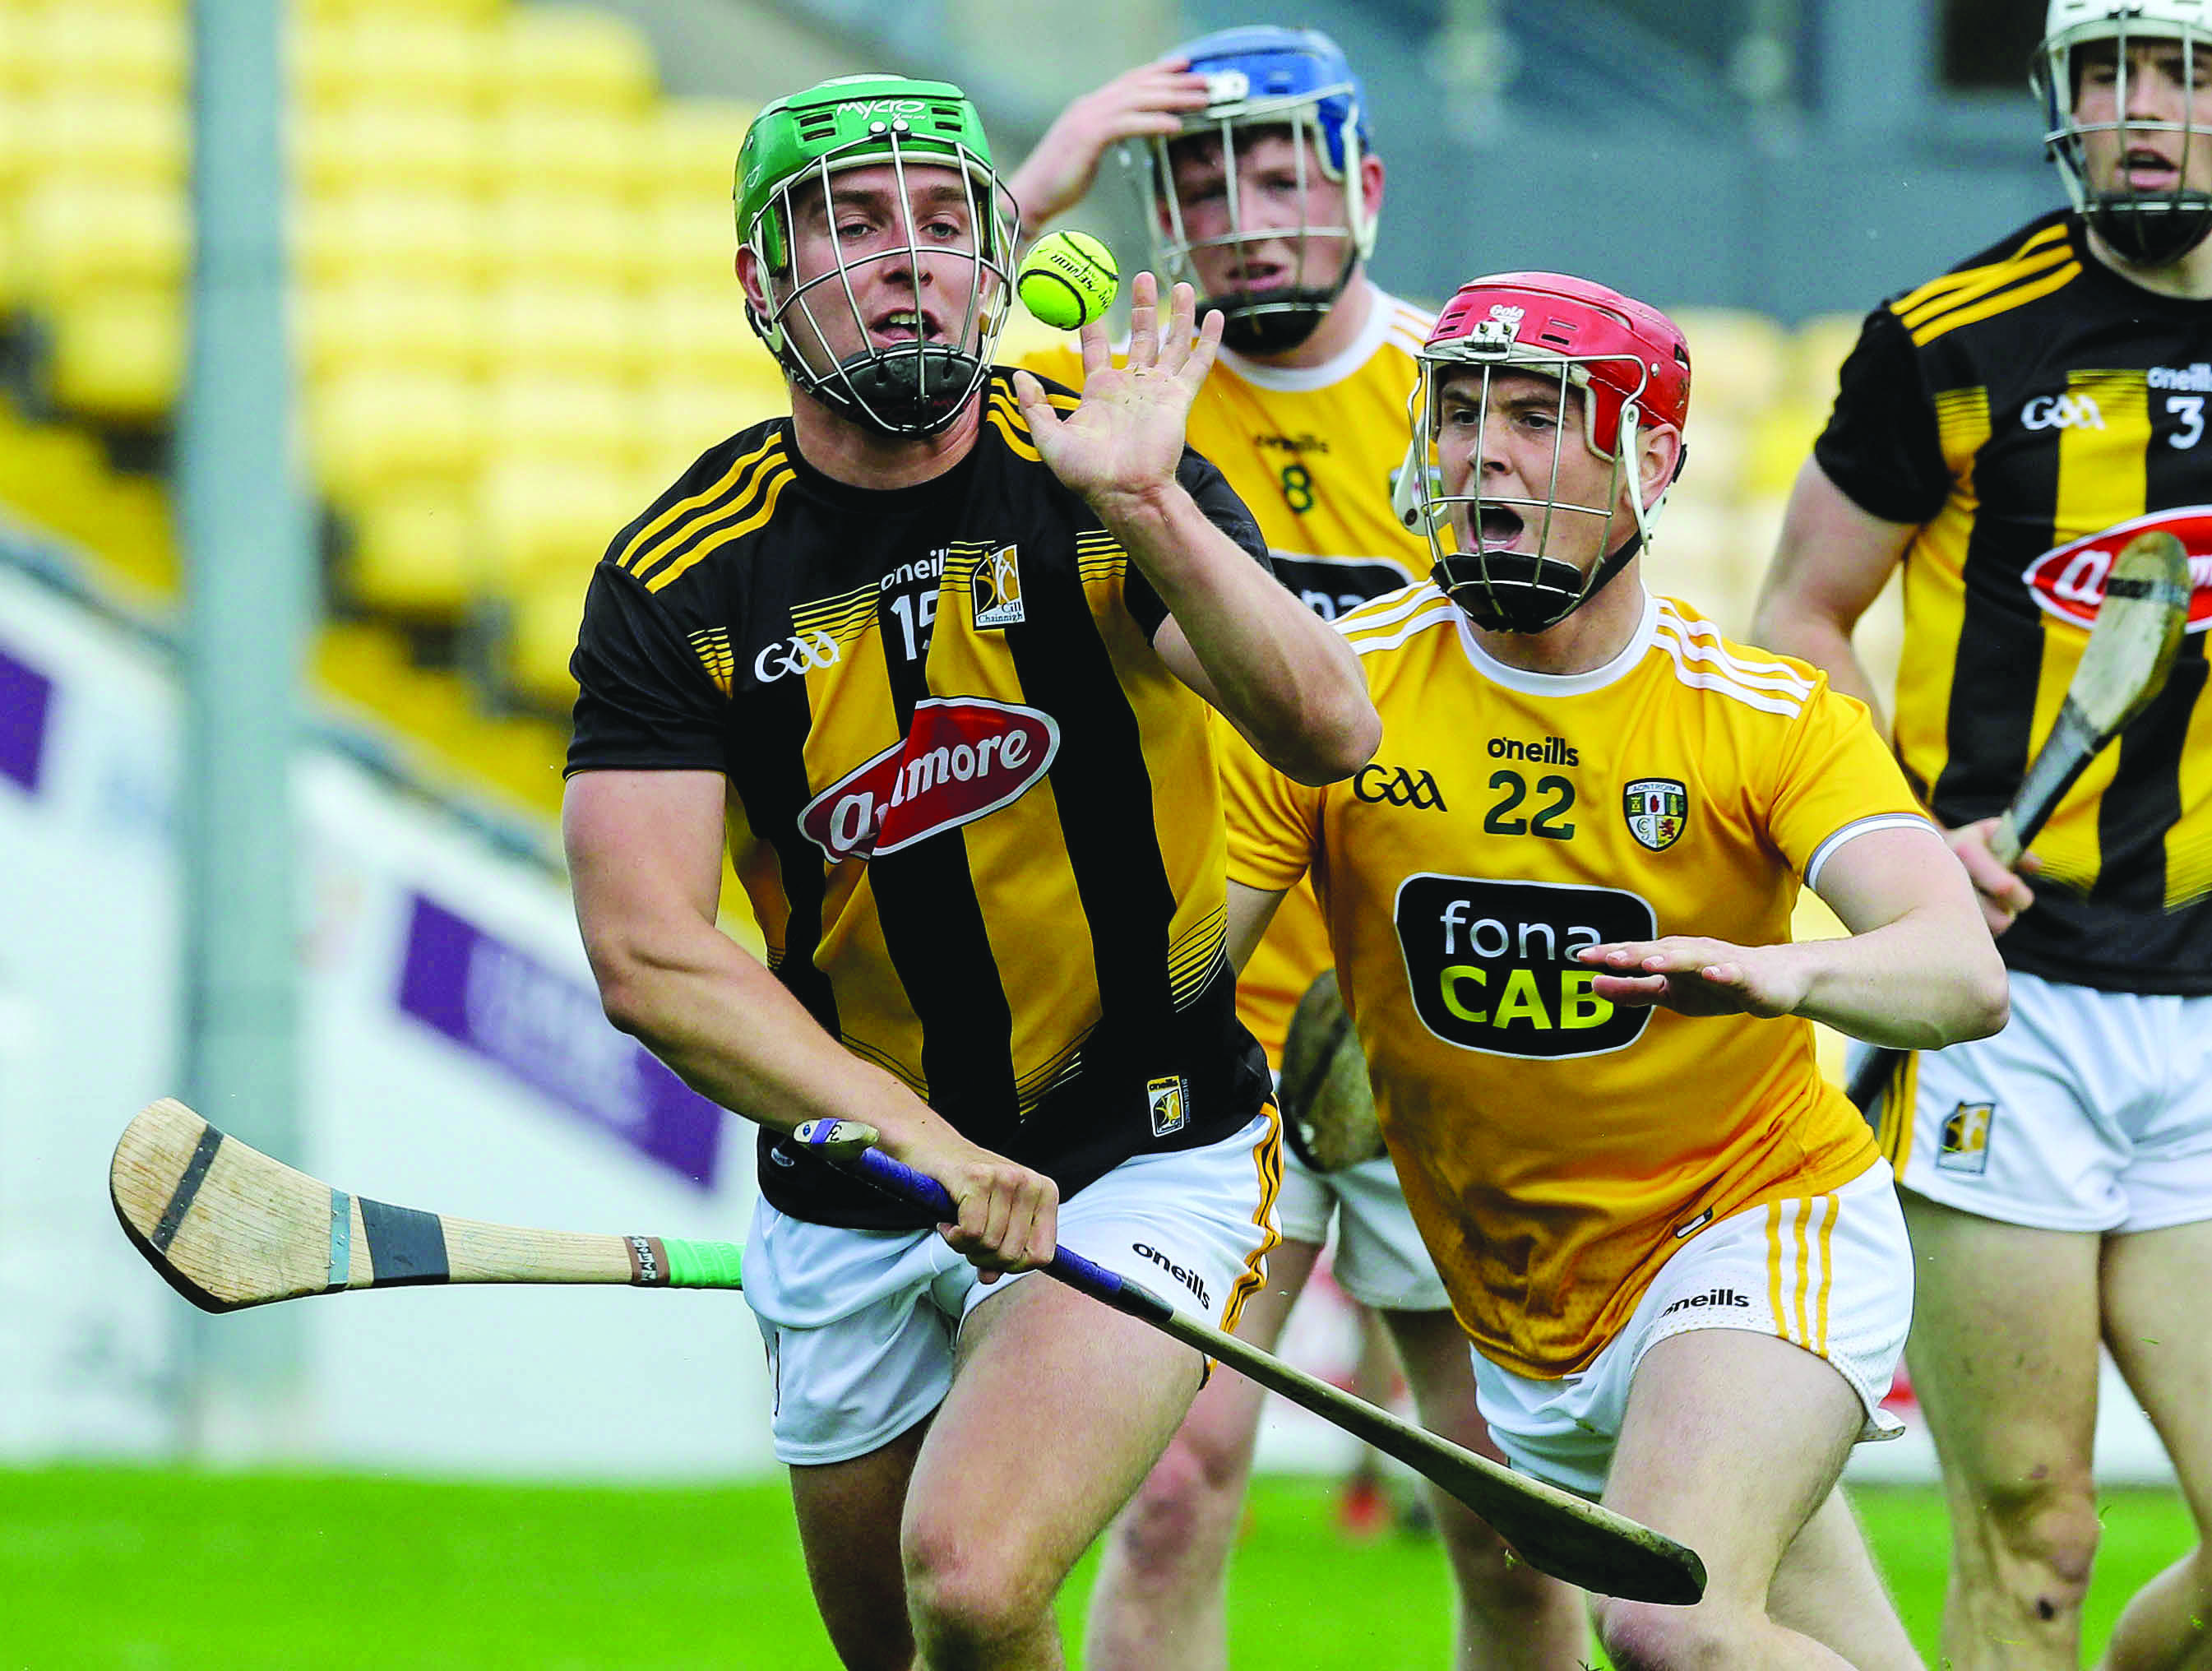 Antrim’s hurlers will be back in Nowlan Park when they begin their 2022 League campaign away to Kilkenny in February